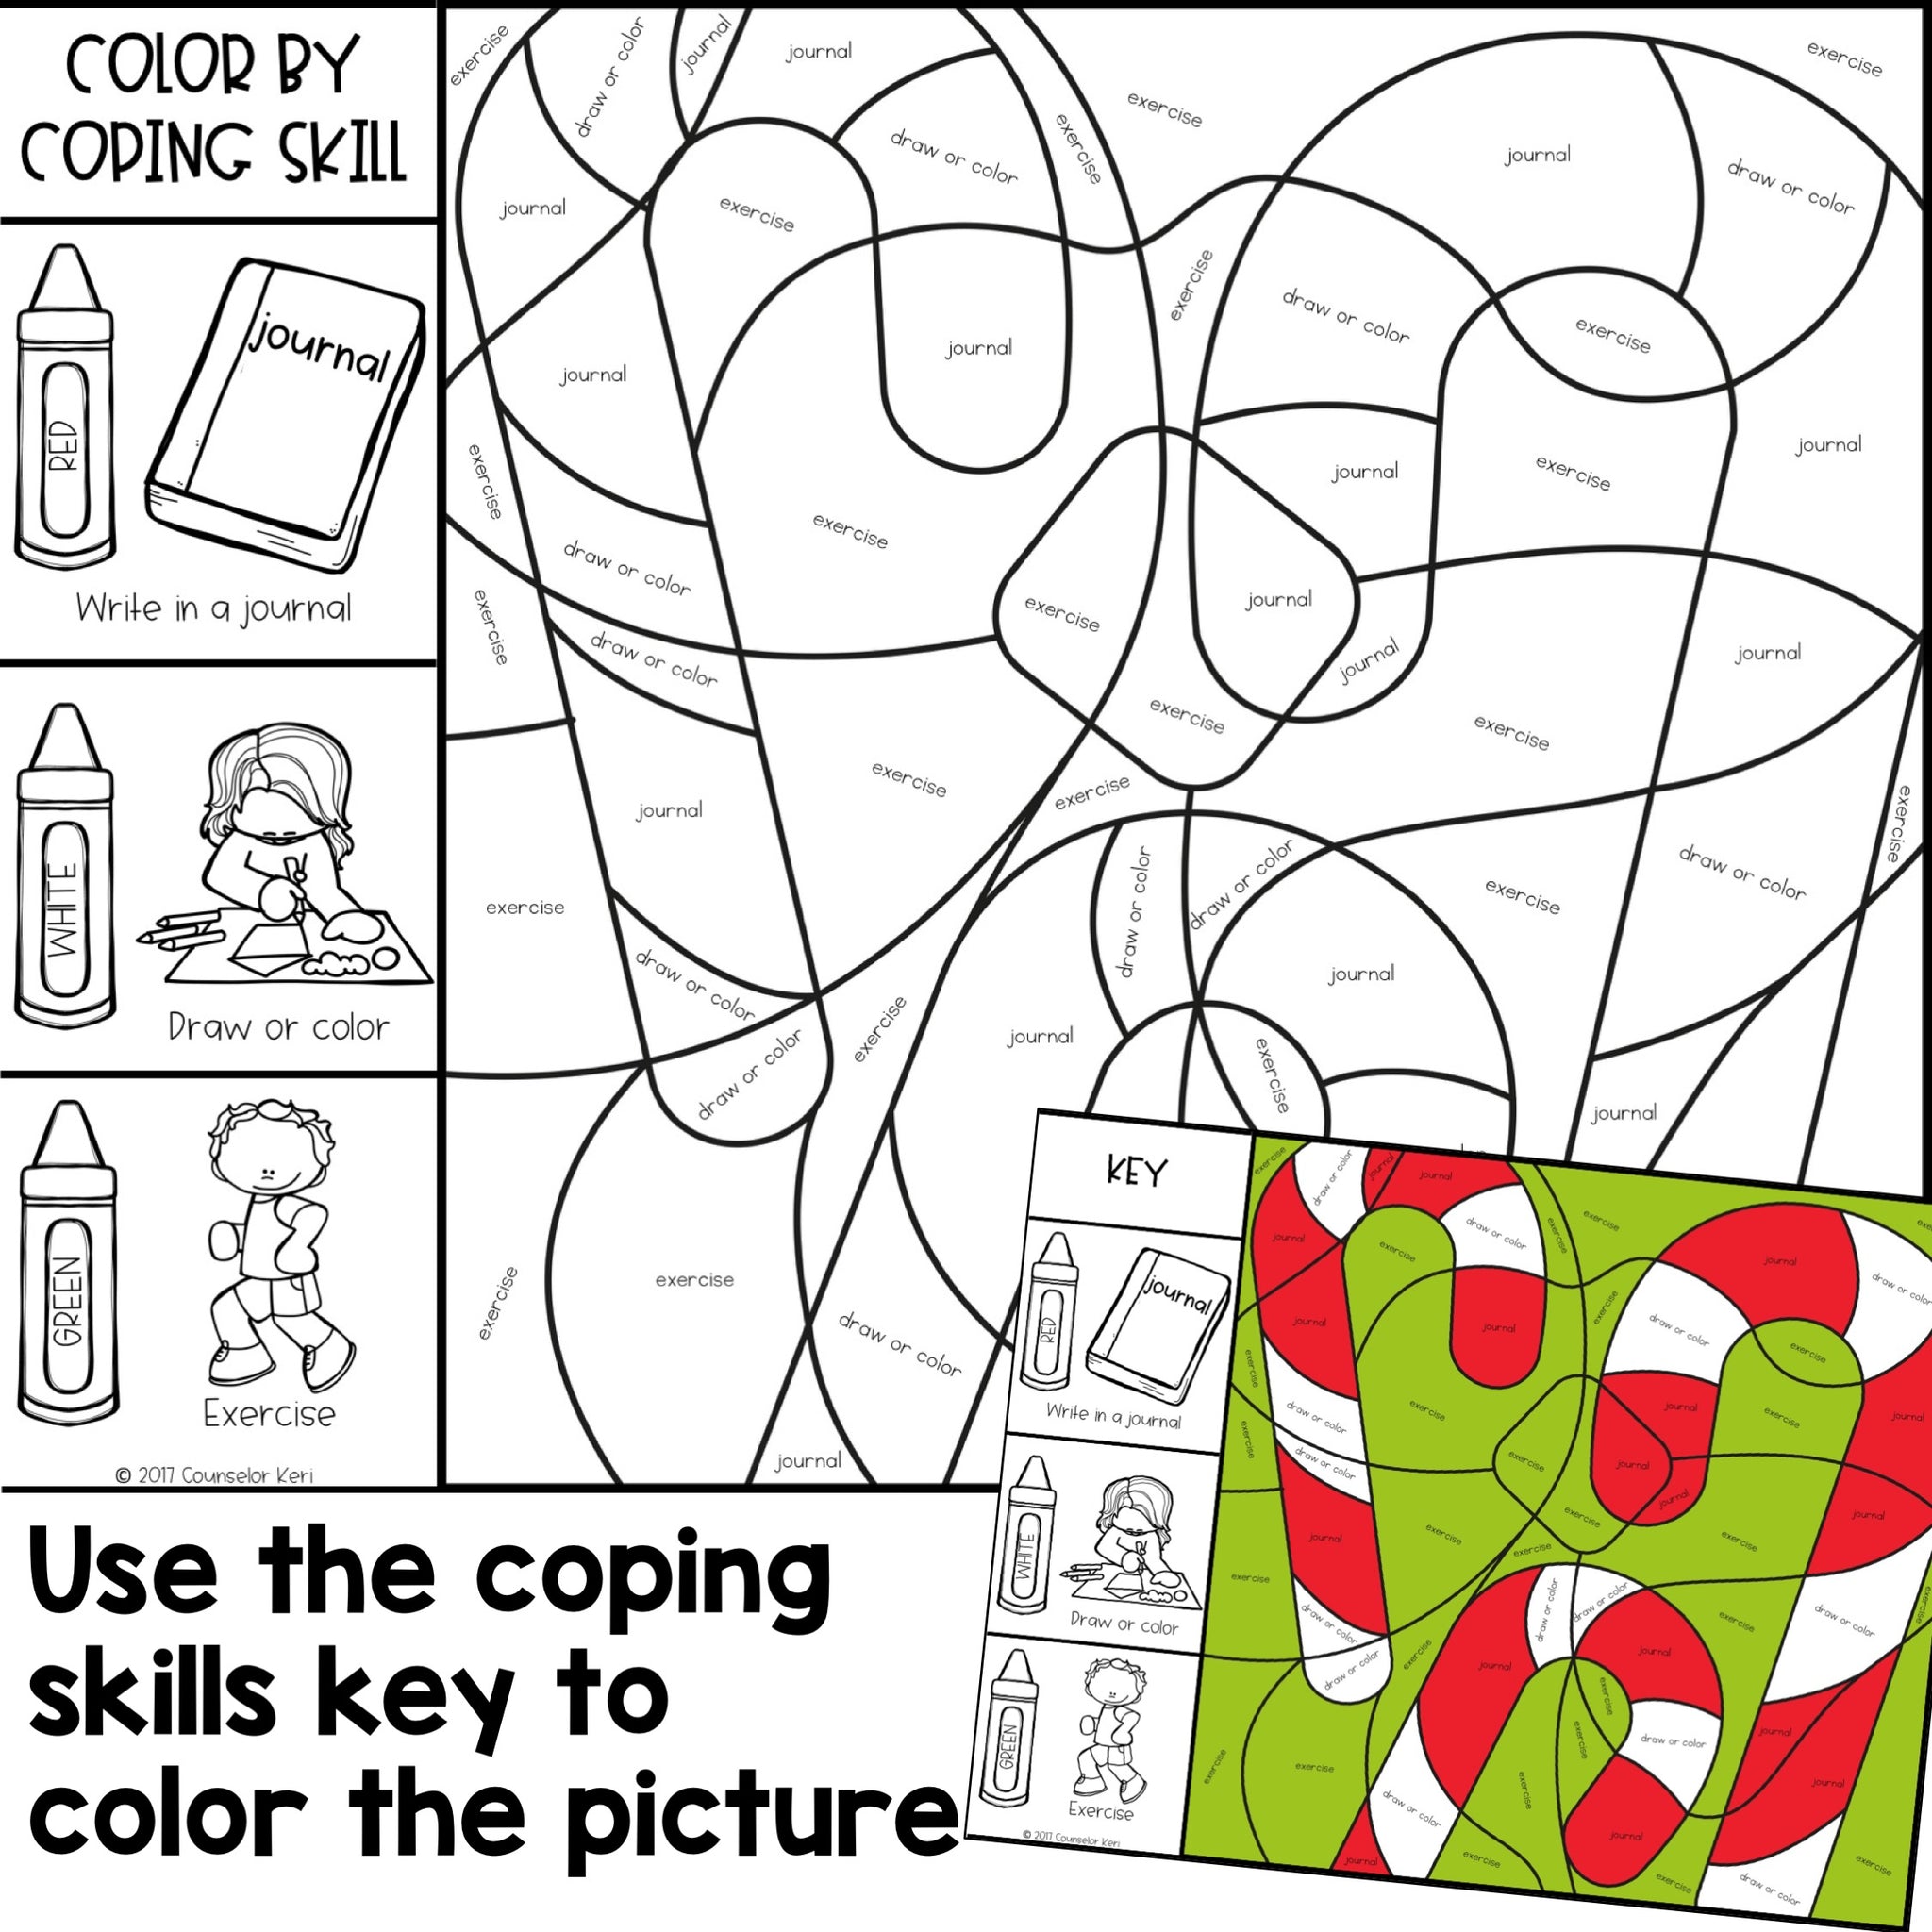 Animal Coping Skills Coloring Pages with simple drawing